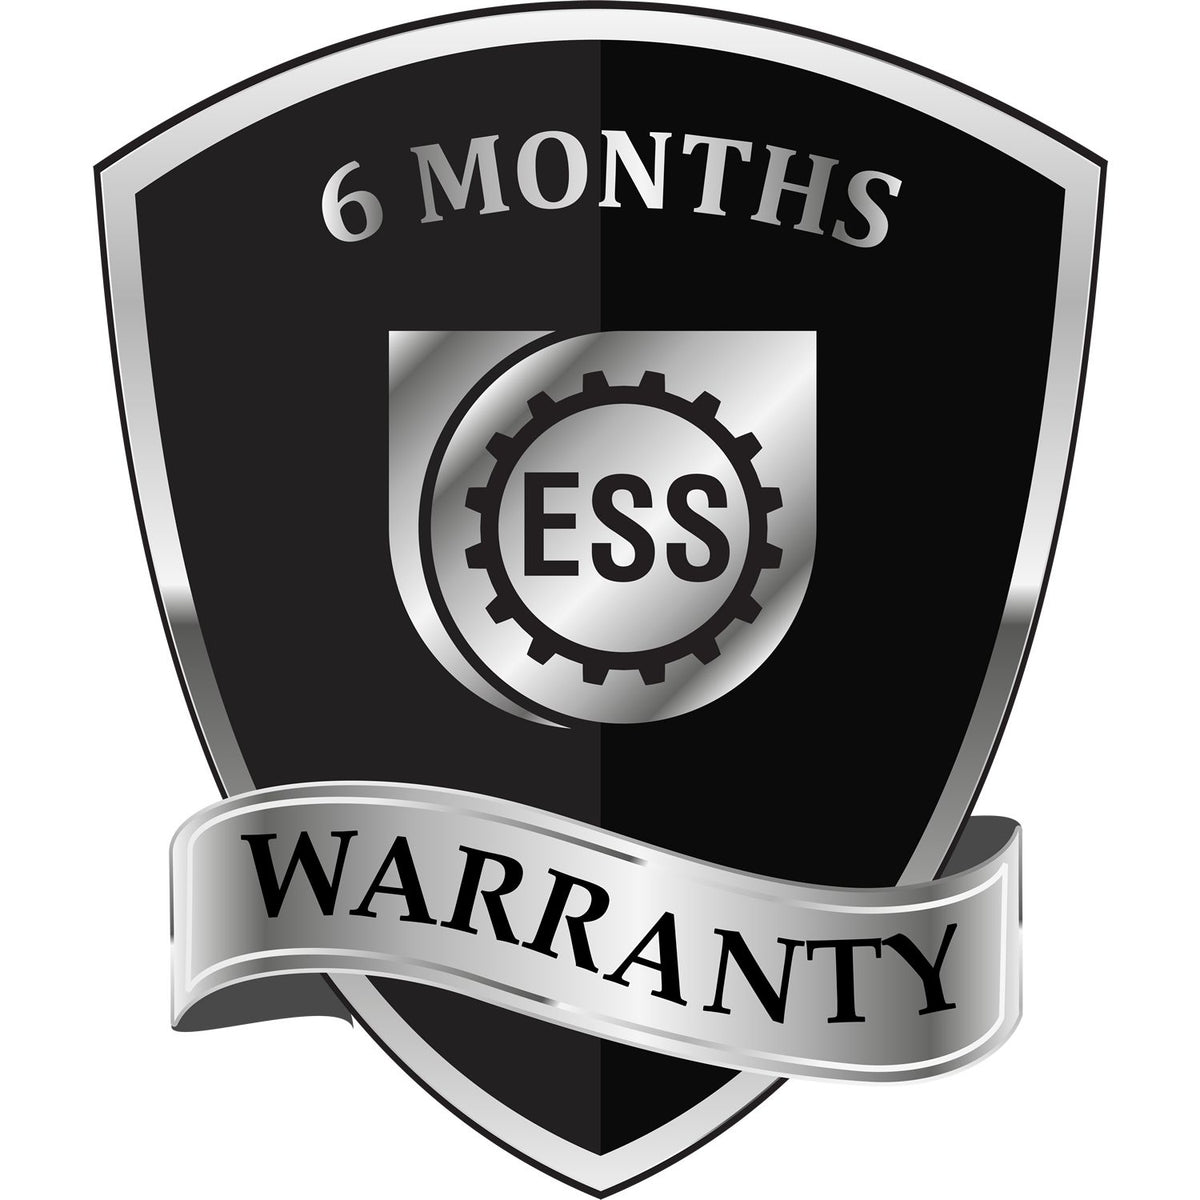 A badge or emblem showing a warranty icon for the Premium MaxLight Pre-Inked New Jersey Engineering Stamp